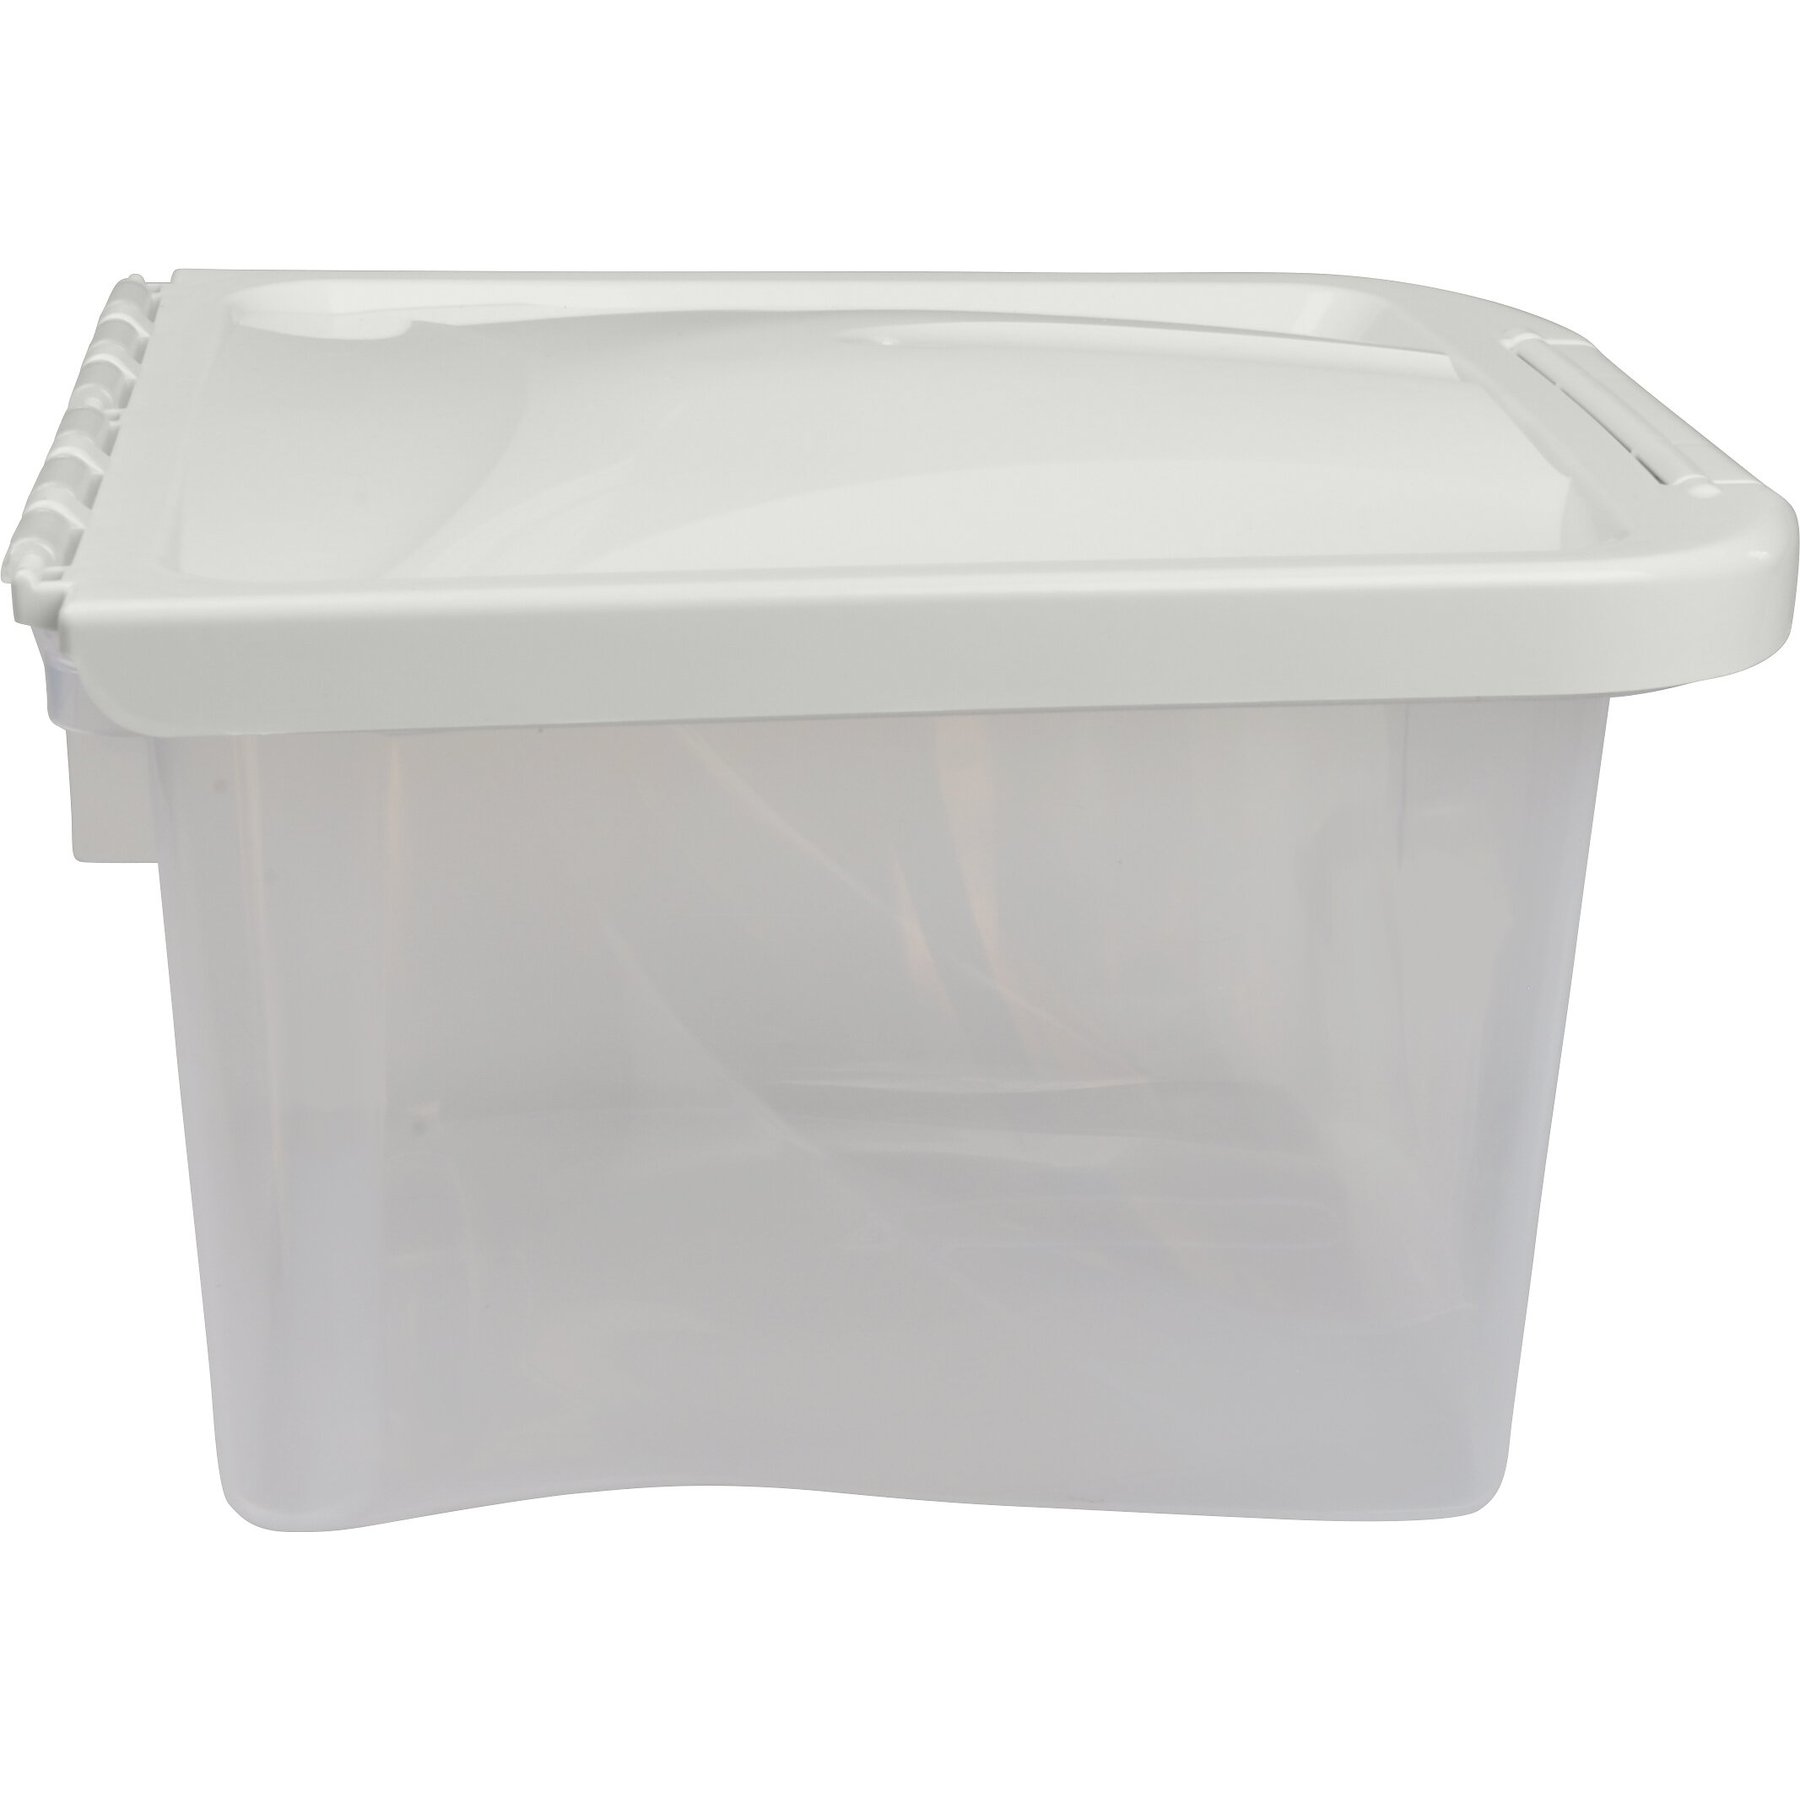 Dog Food Storage Container,15 Lb Dog Food Containers Large